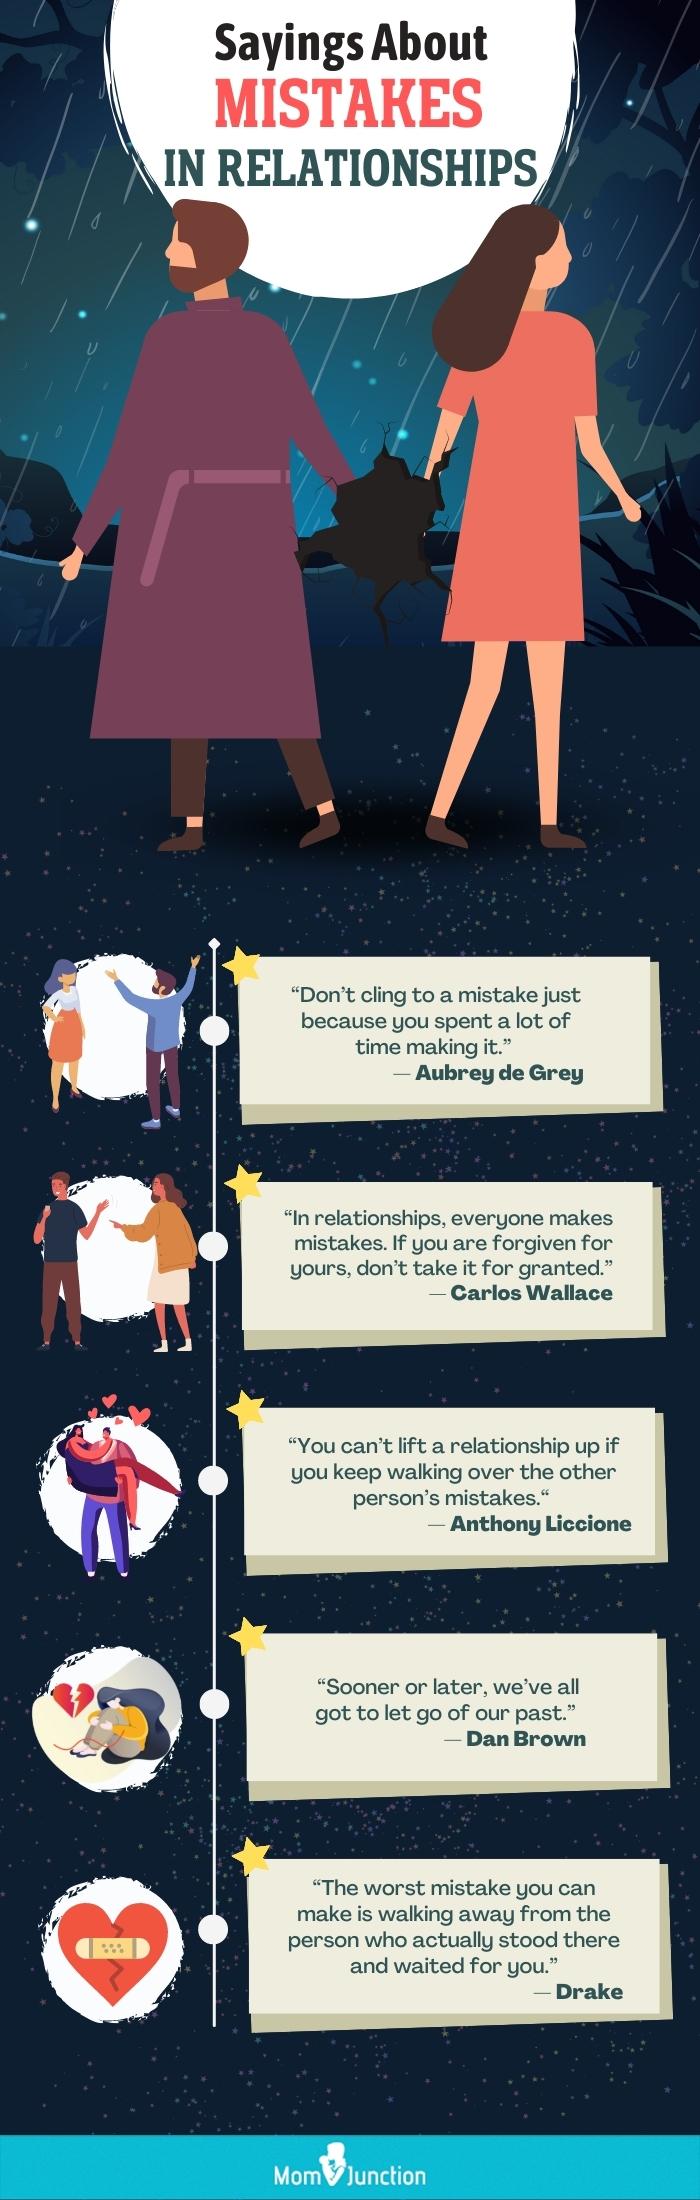 quotes on mistakes in relationships (infographic)